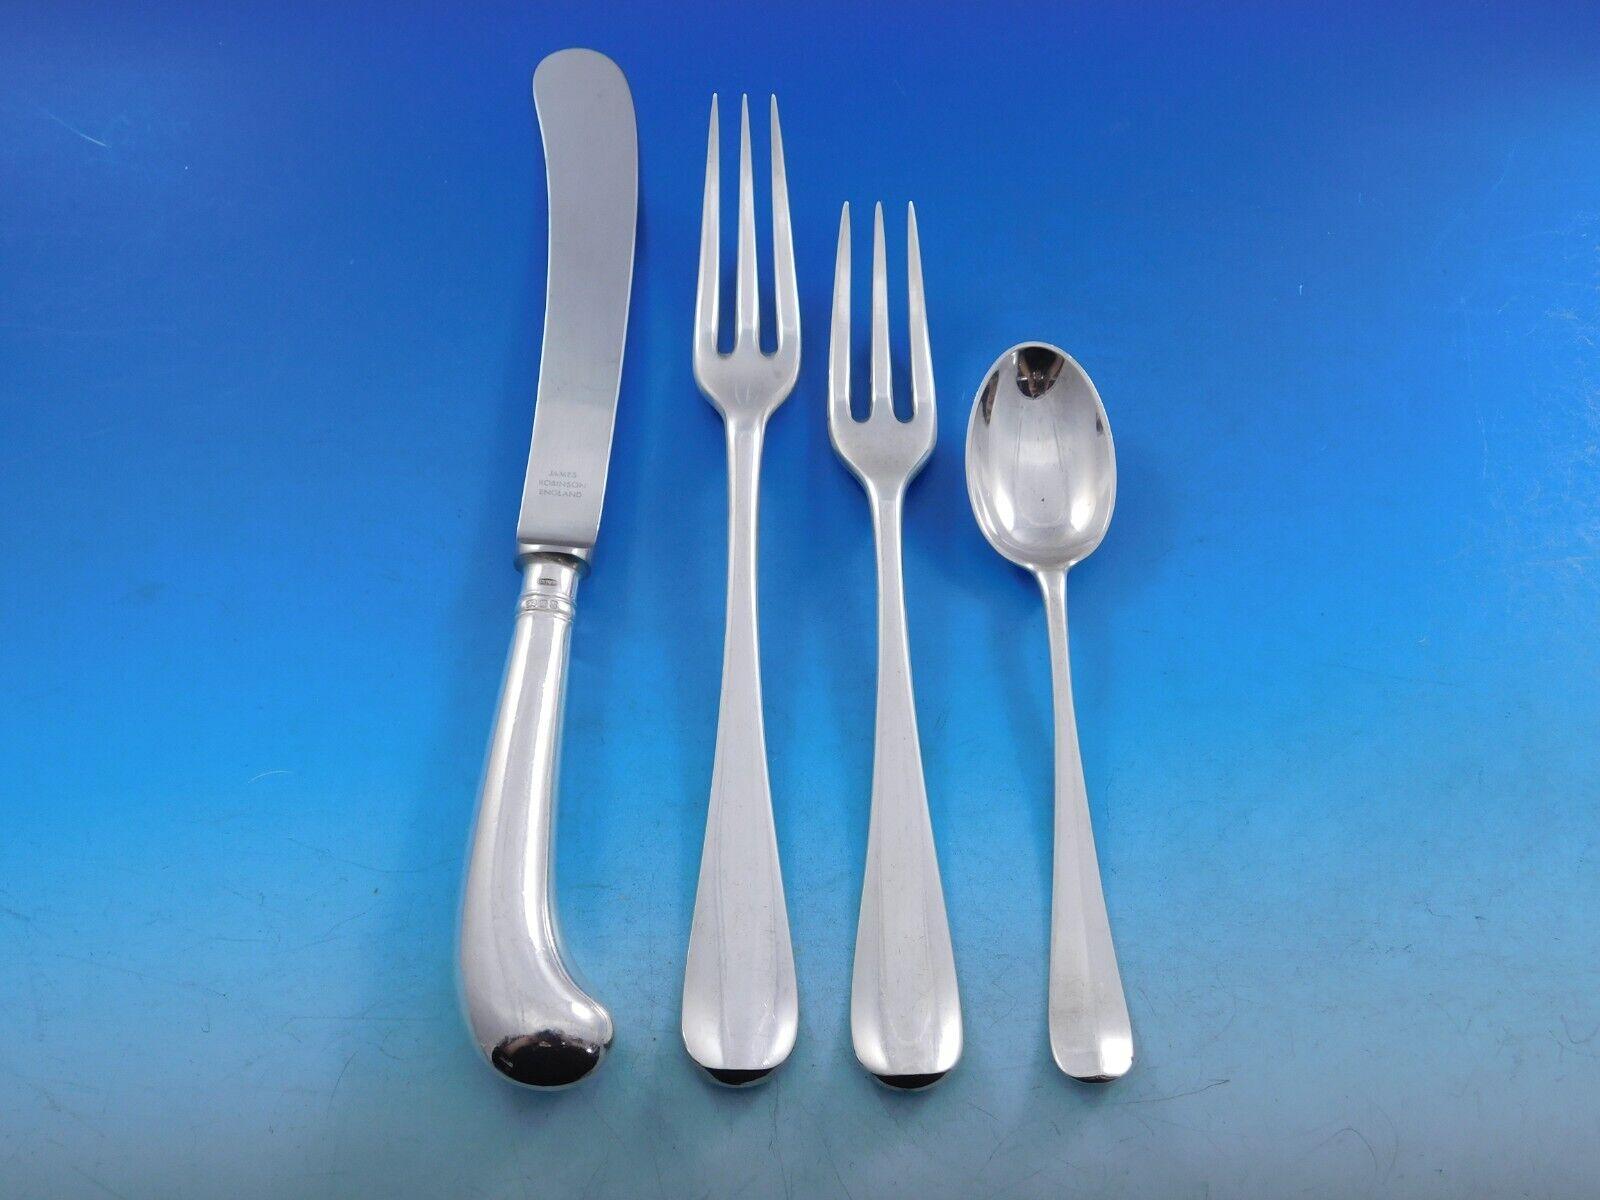 James Robinson

For 70 years, James Robinson has been selling exquisite handmade sterling silver flatware in Sheffield, England. Today, the silver is still made in the traditional way. They start with a rectangular strip of silver, then forge,